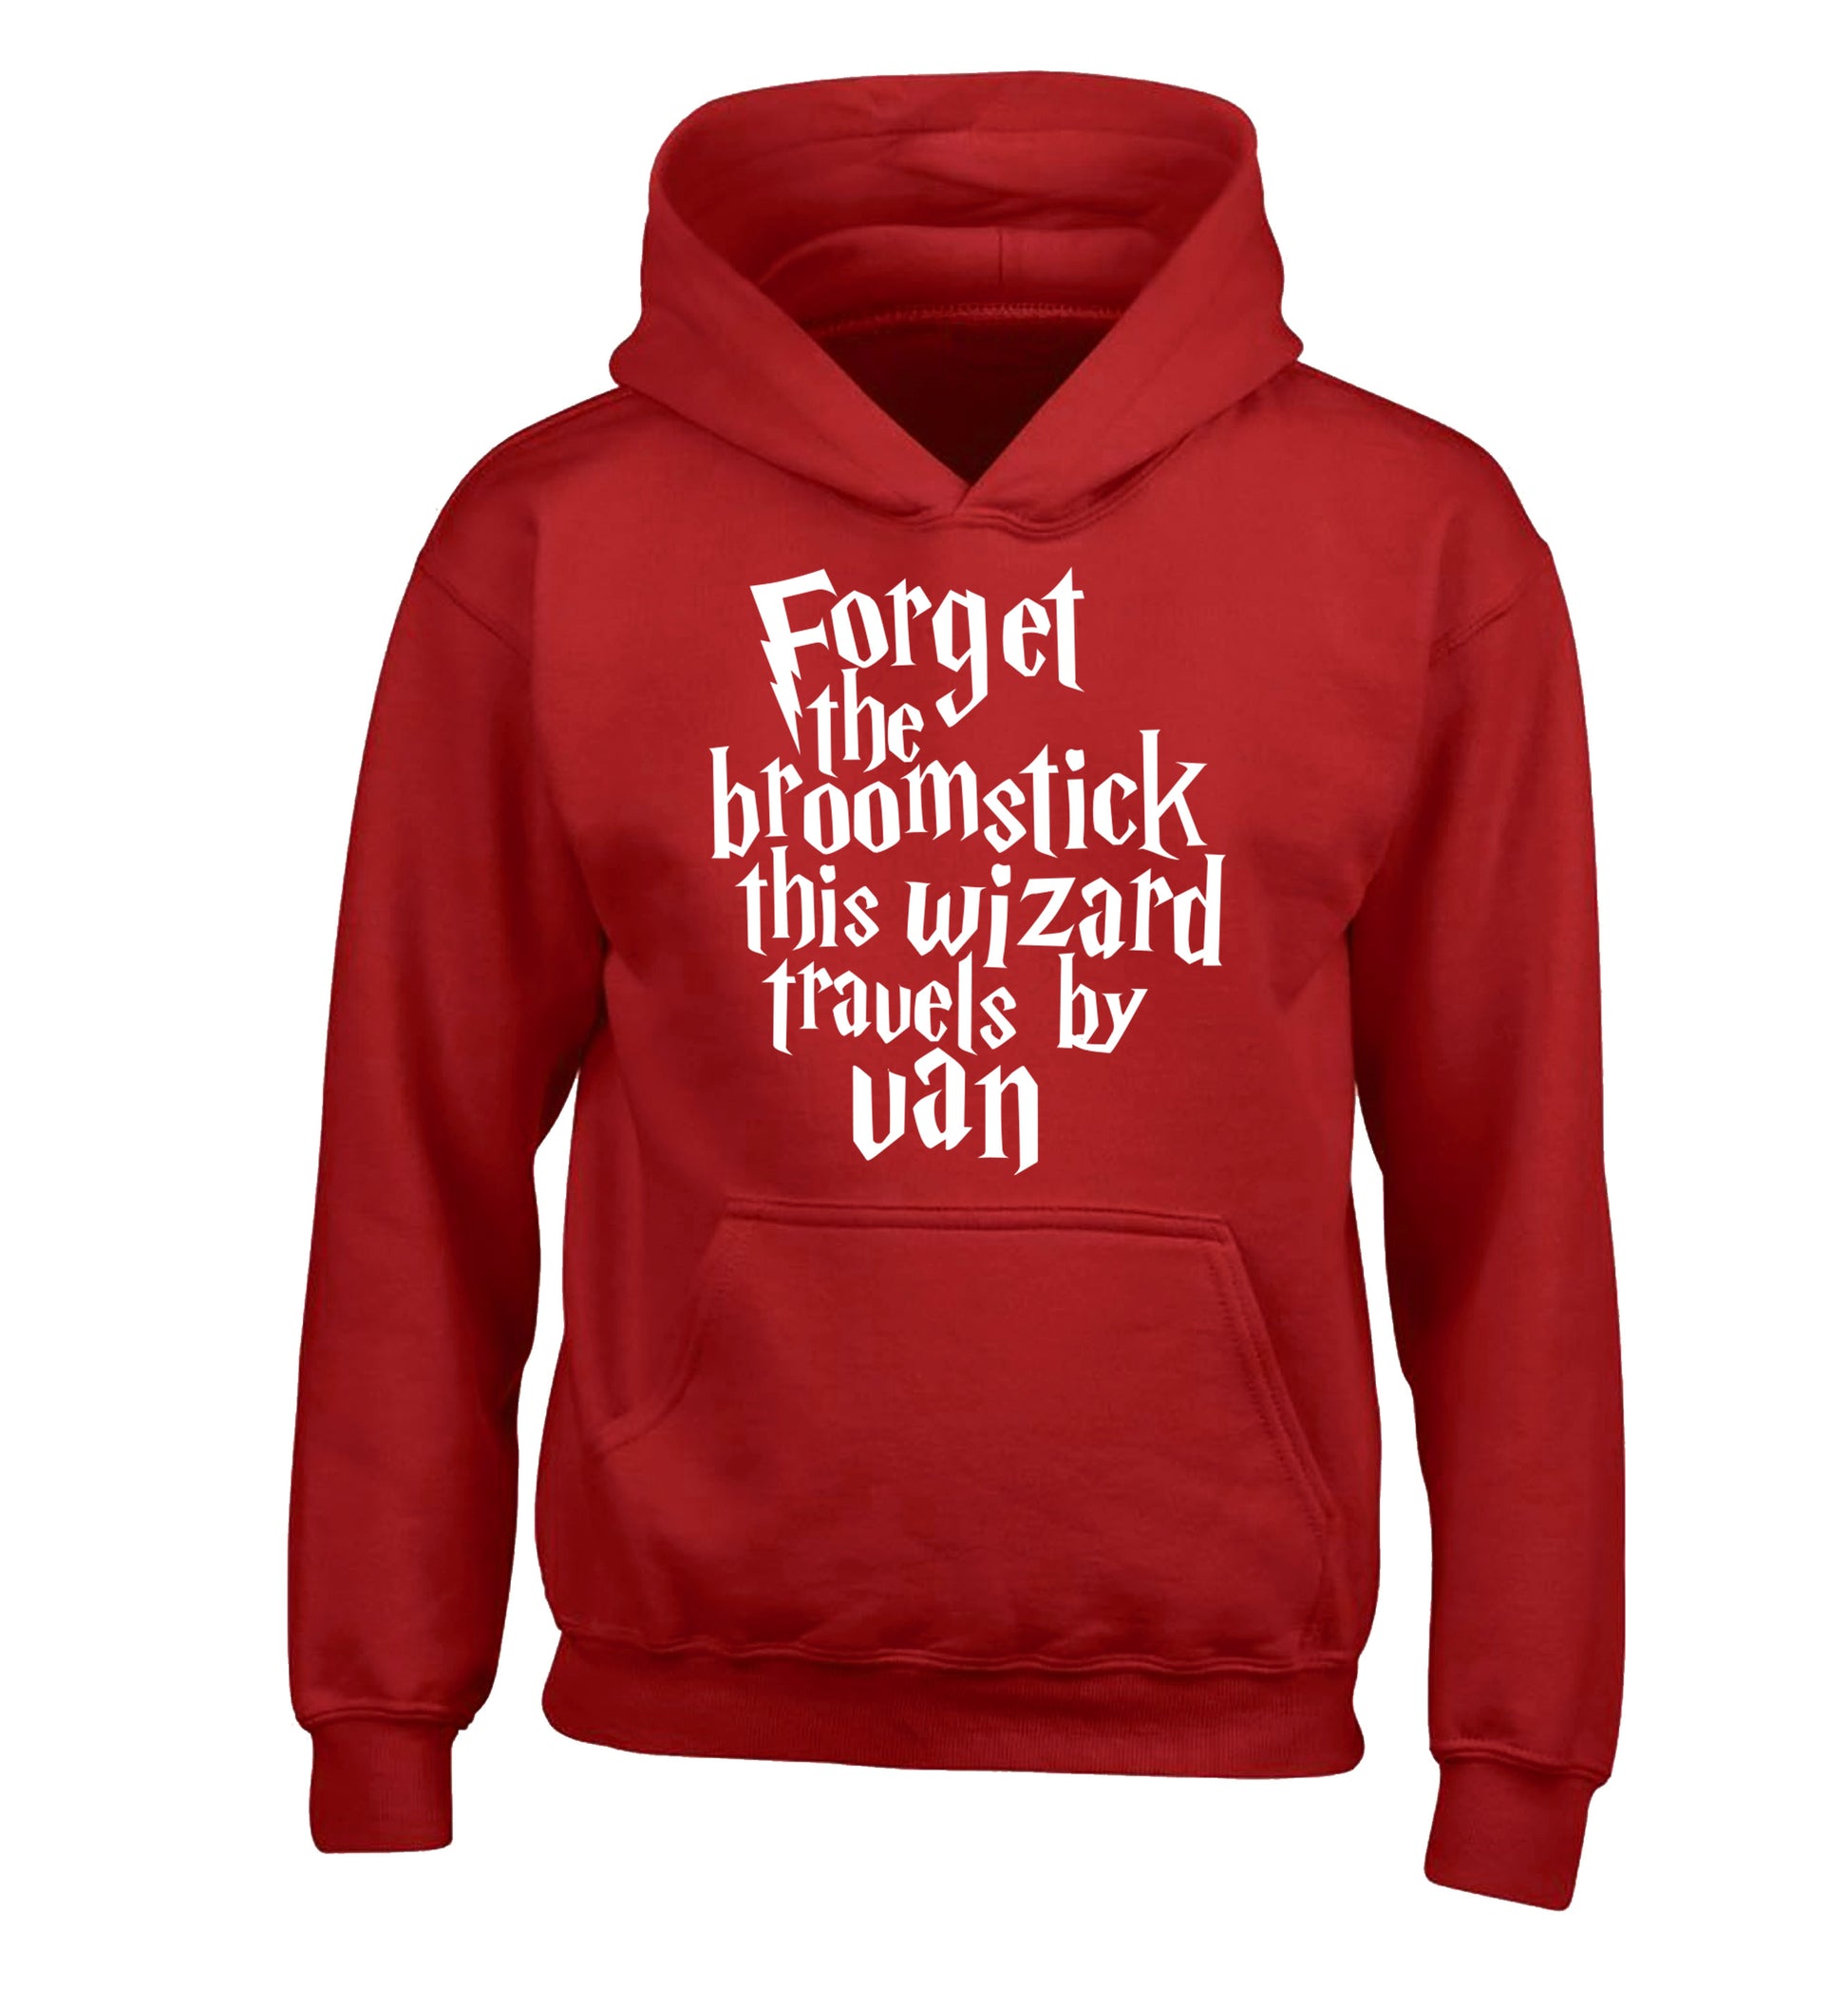 Forget the broomstick this wizard travels by van children's red hoodie 12-14 Years